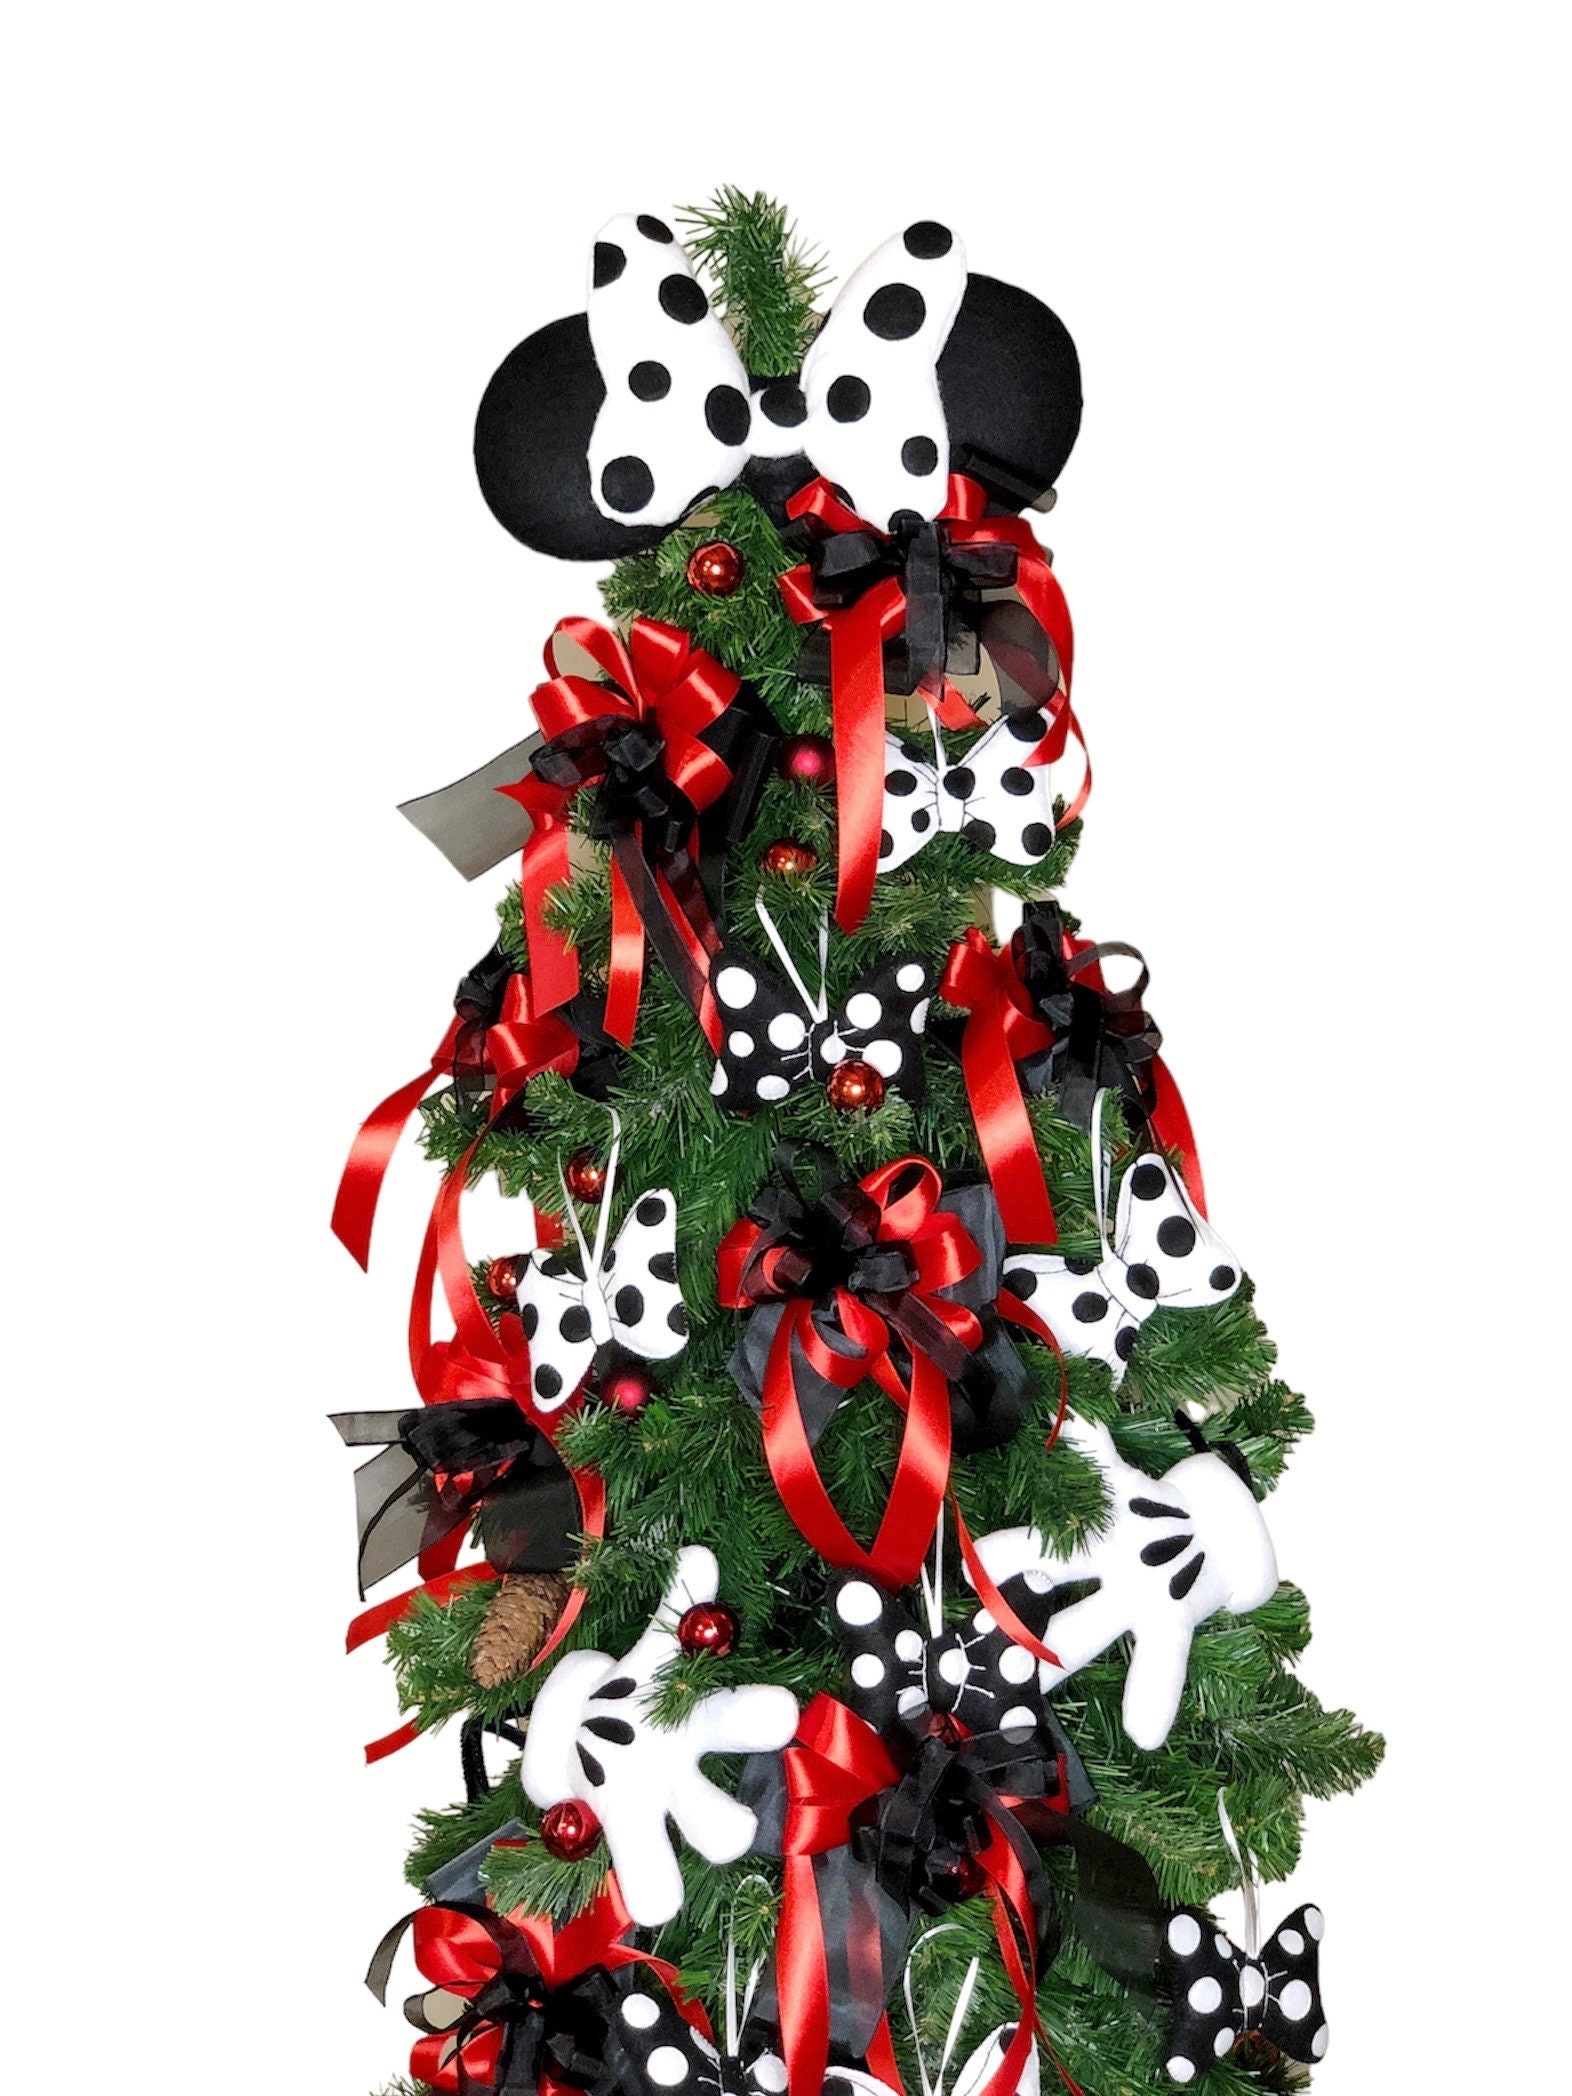 Mickey Mouse Christmas Ribbon  Disney Christmas Ribbon Wired - 5y